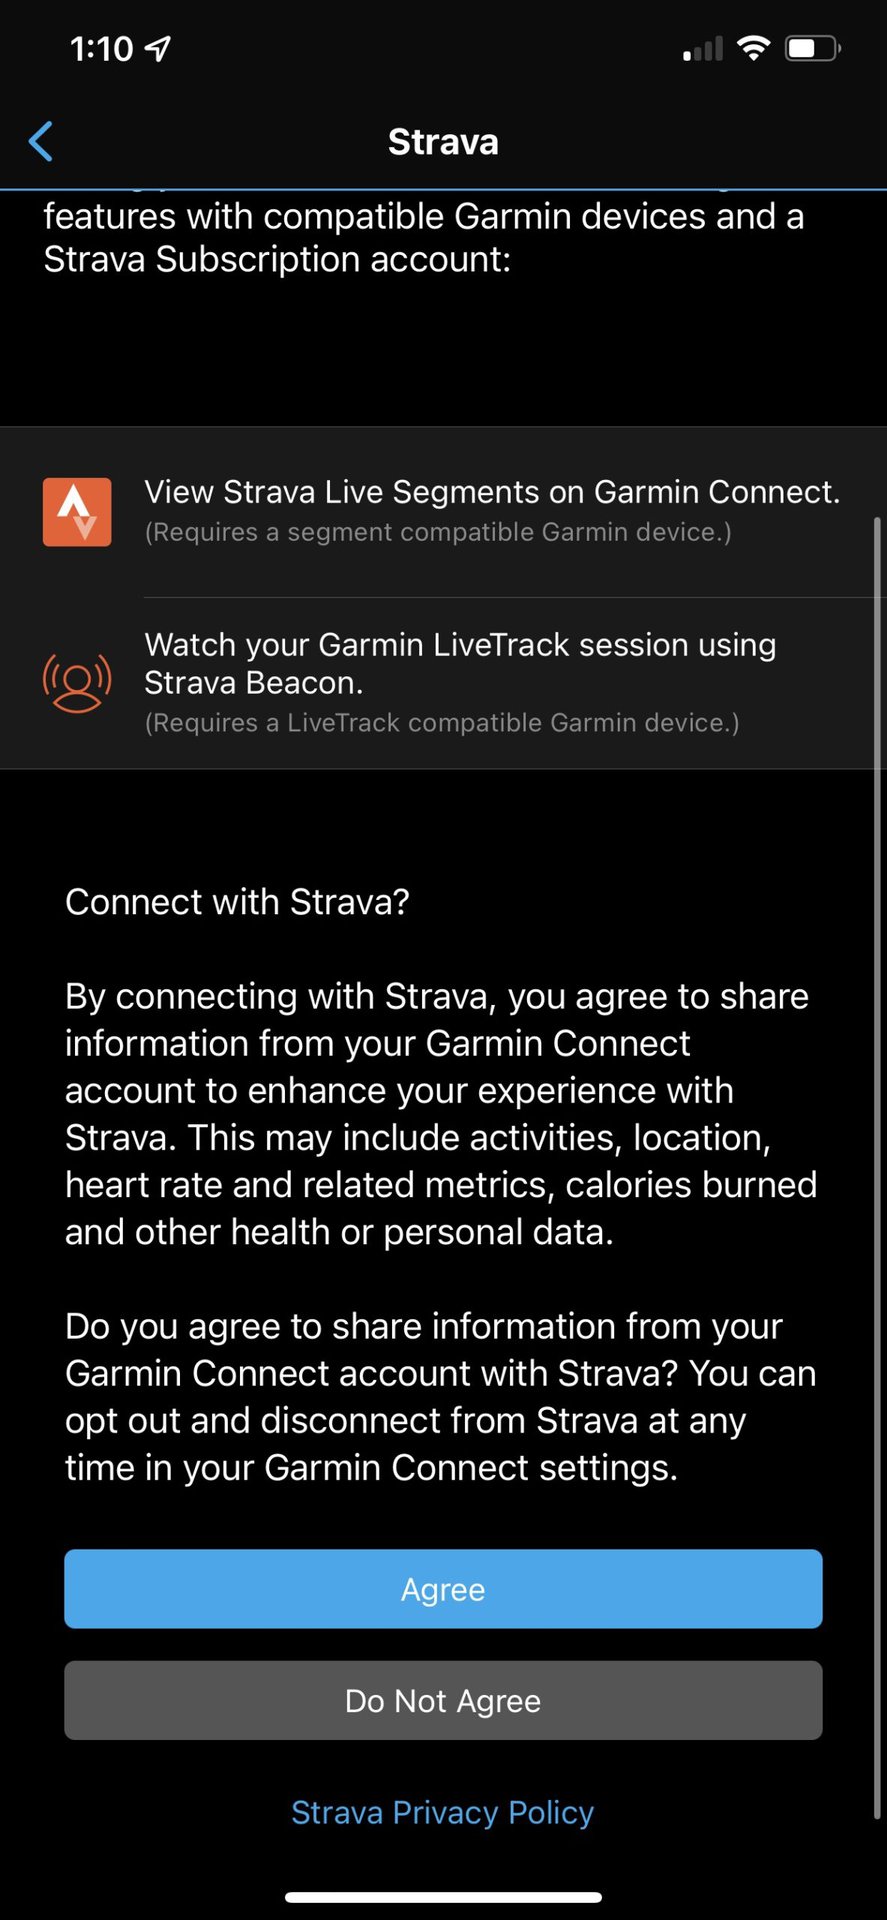 The Garmin Connect app showing the Strava Agree screen.